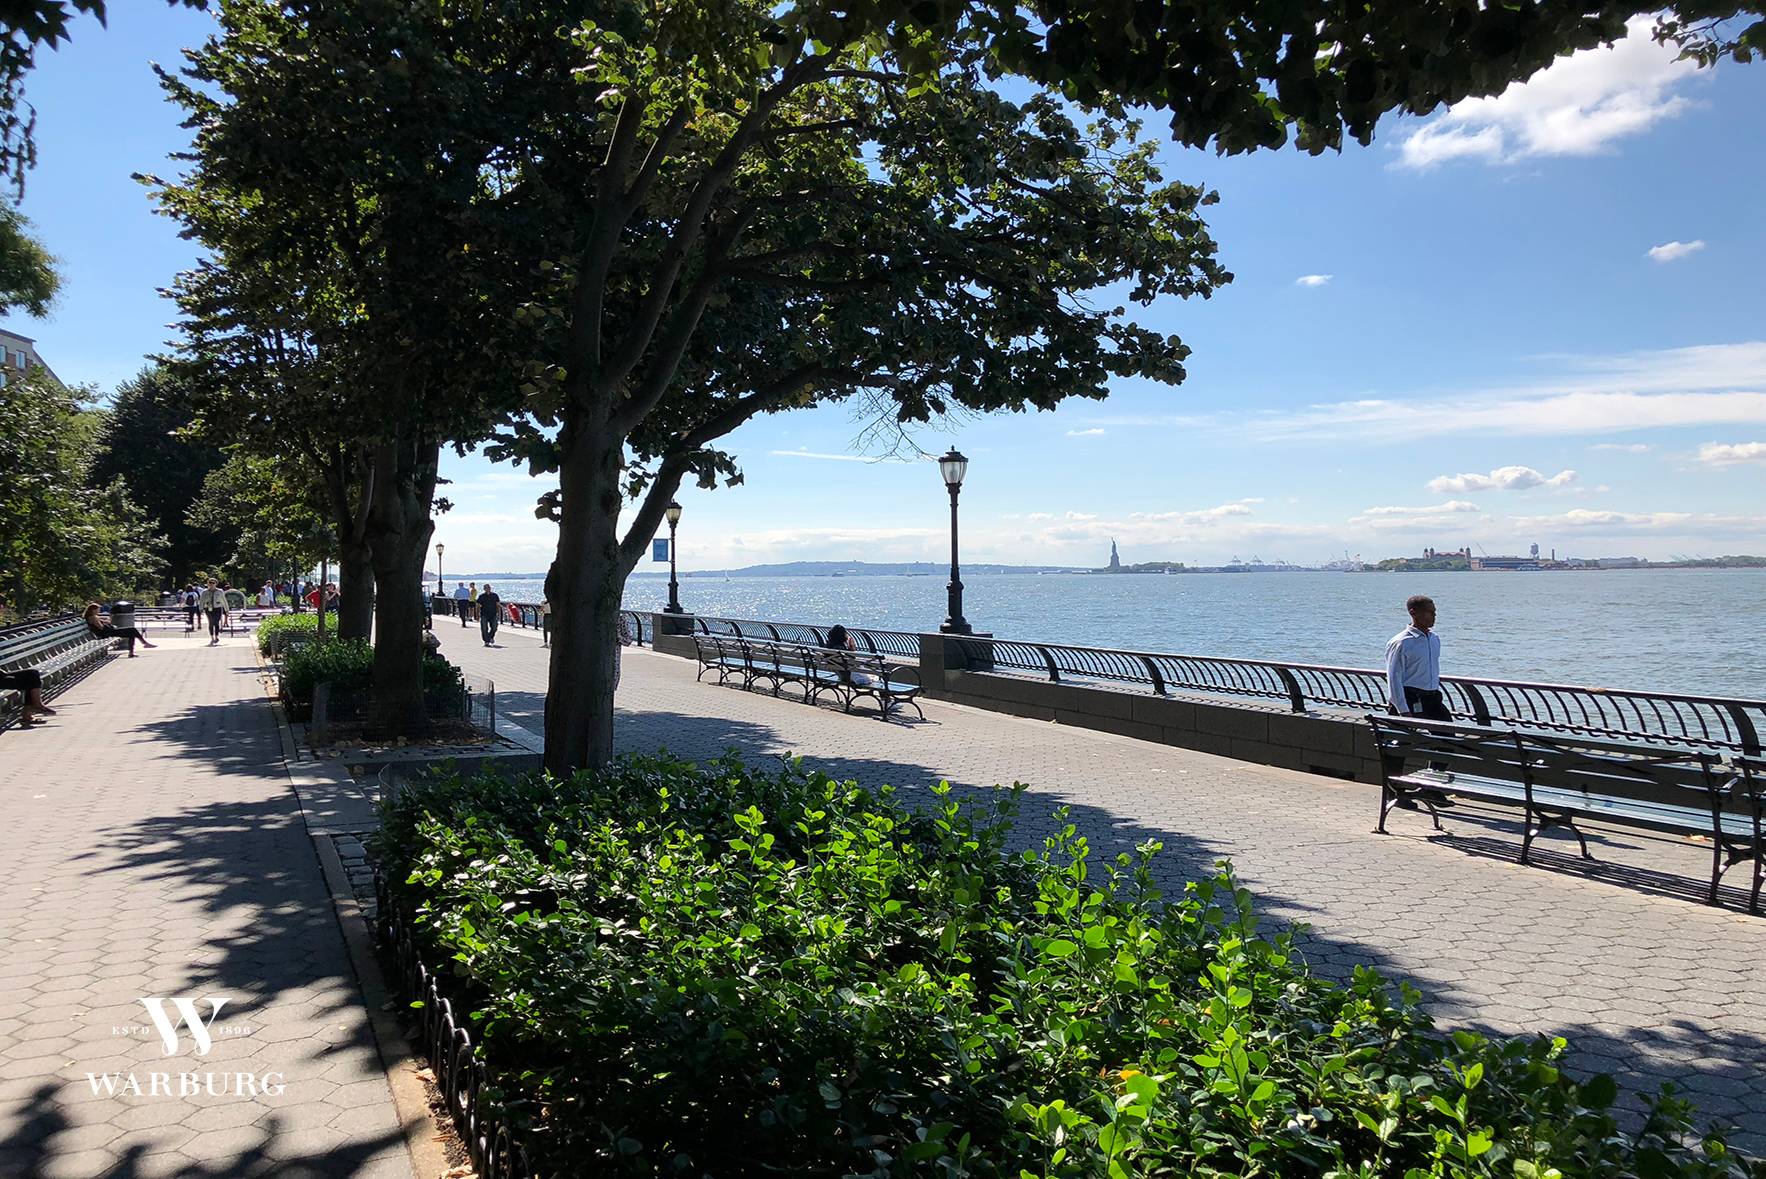 Exciting Battery Park City, close to Brookfield Place World Financial Center, the latest in art, music, fine outdoor dining, cuisine, stores amp ; luxury boutiques.